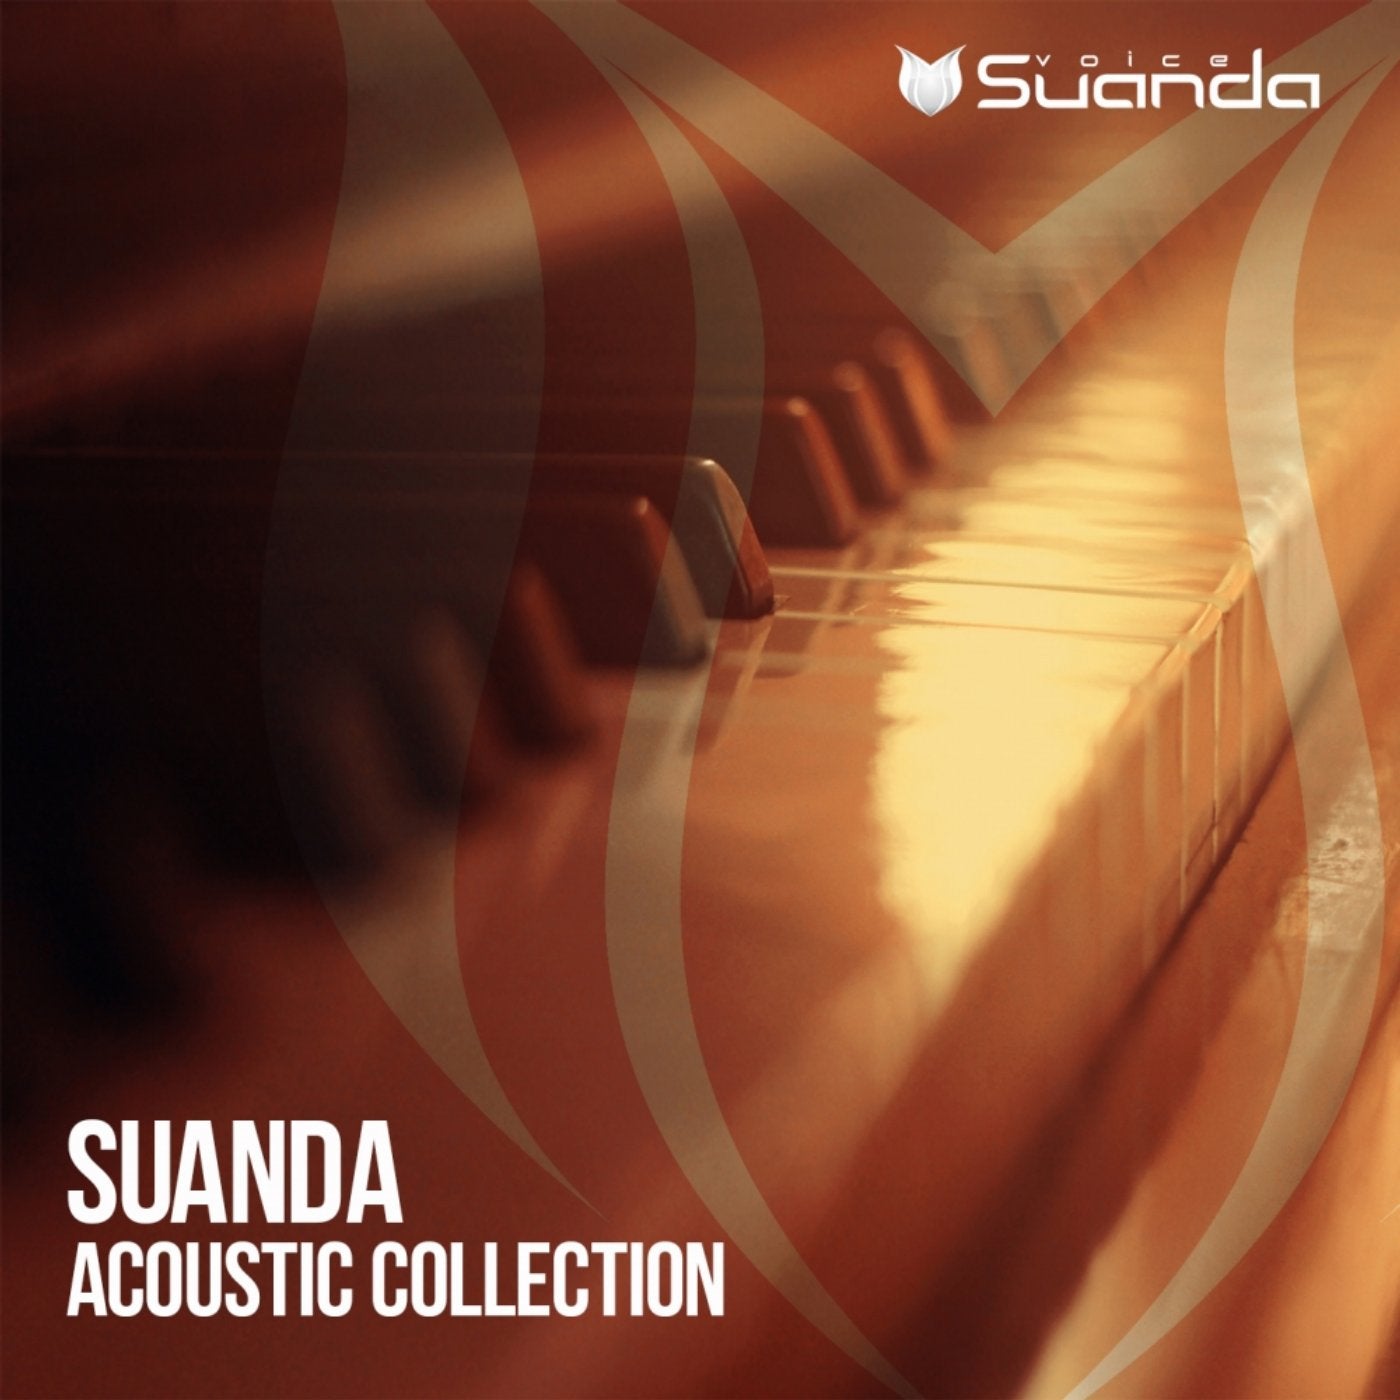 Suanda Acoustic Collection